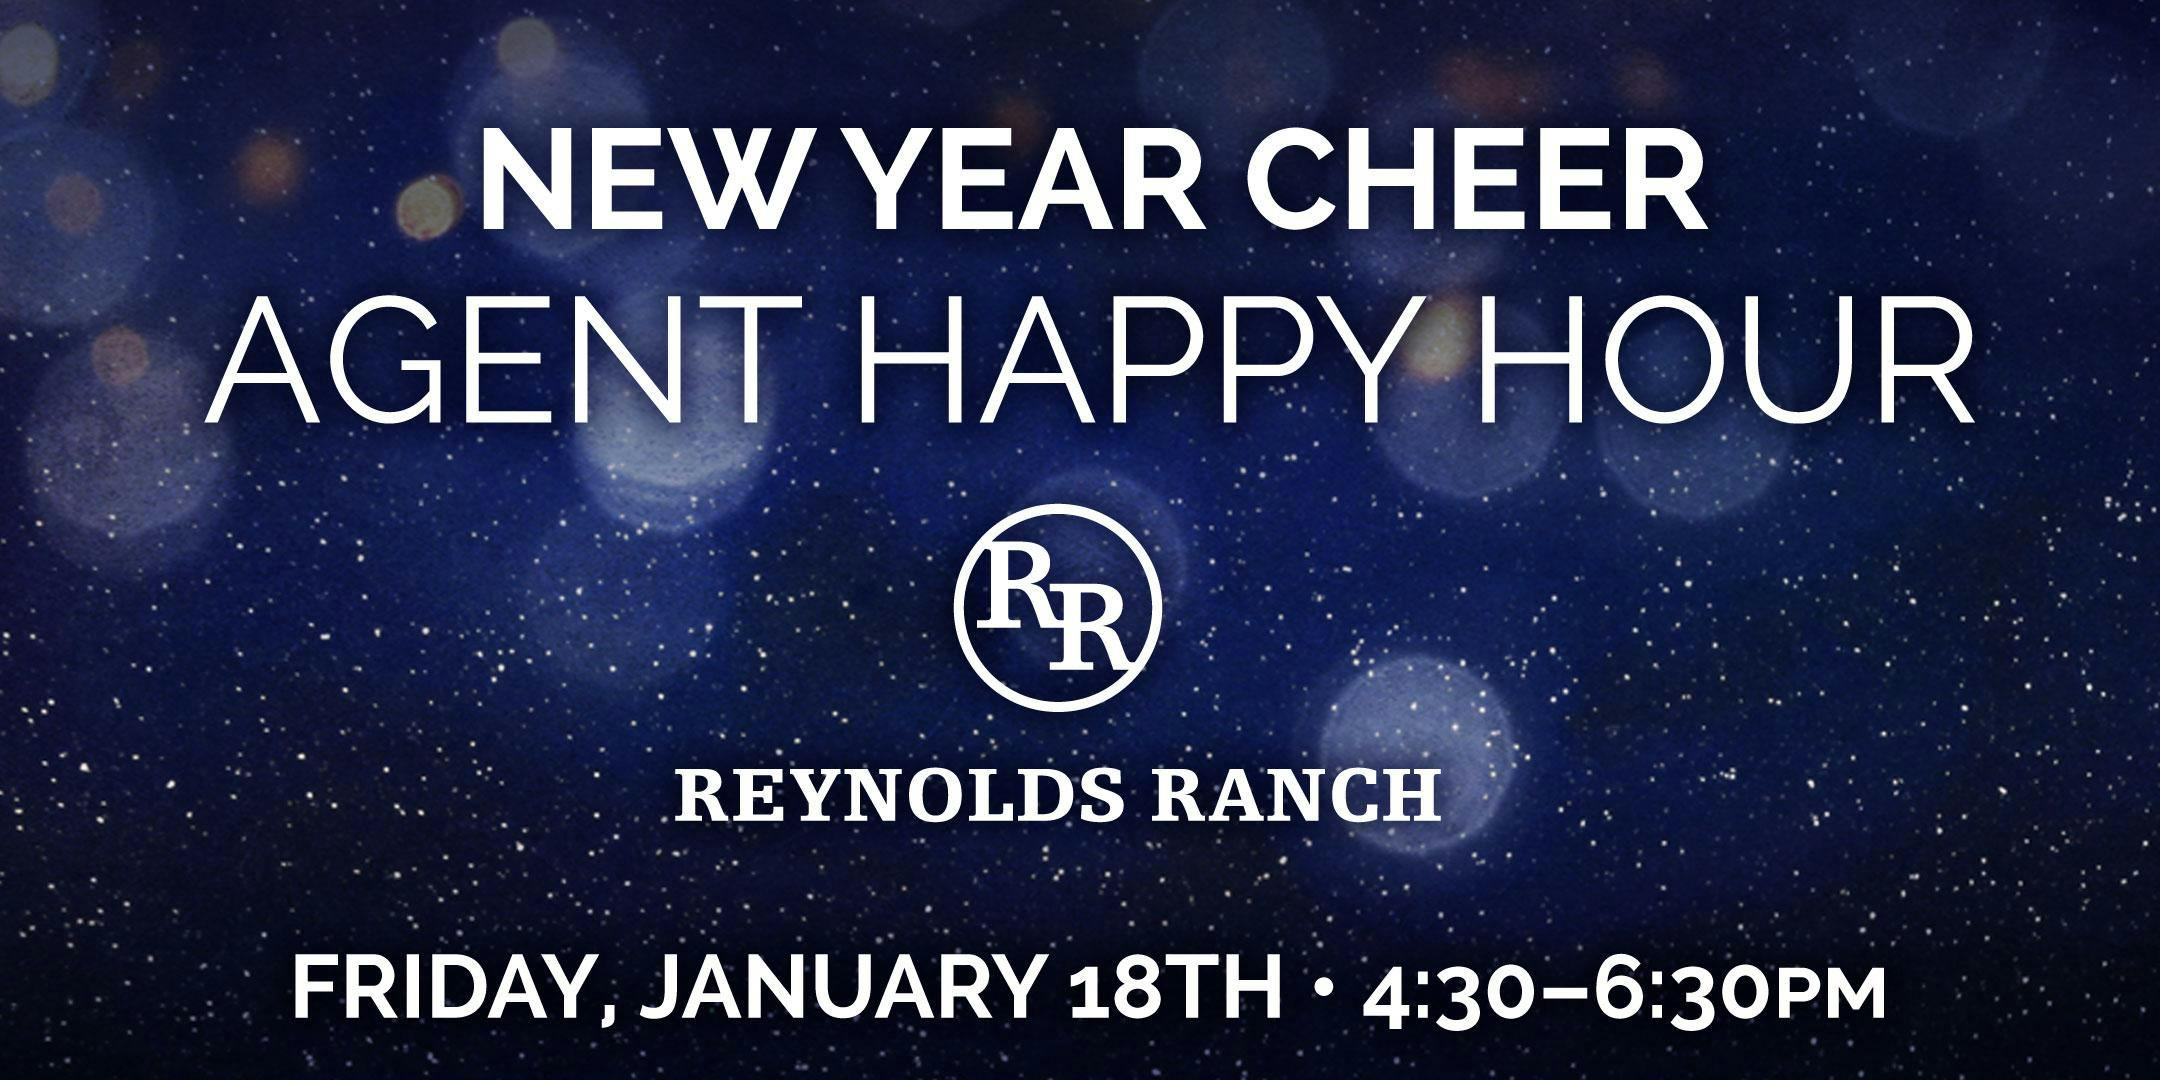 AGENT HAPPY HOUR AT REYNOLDS RANCH